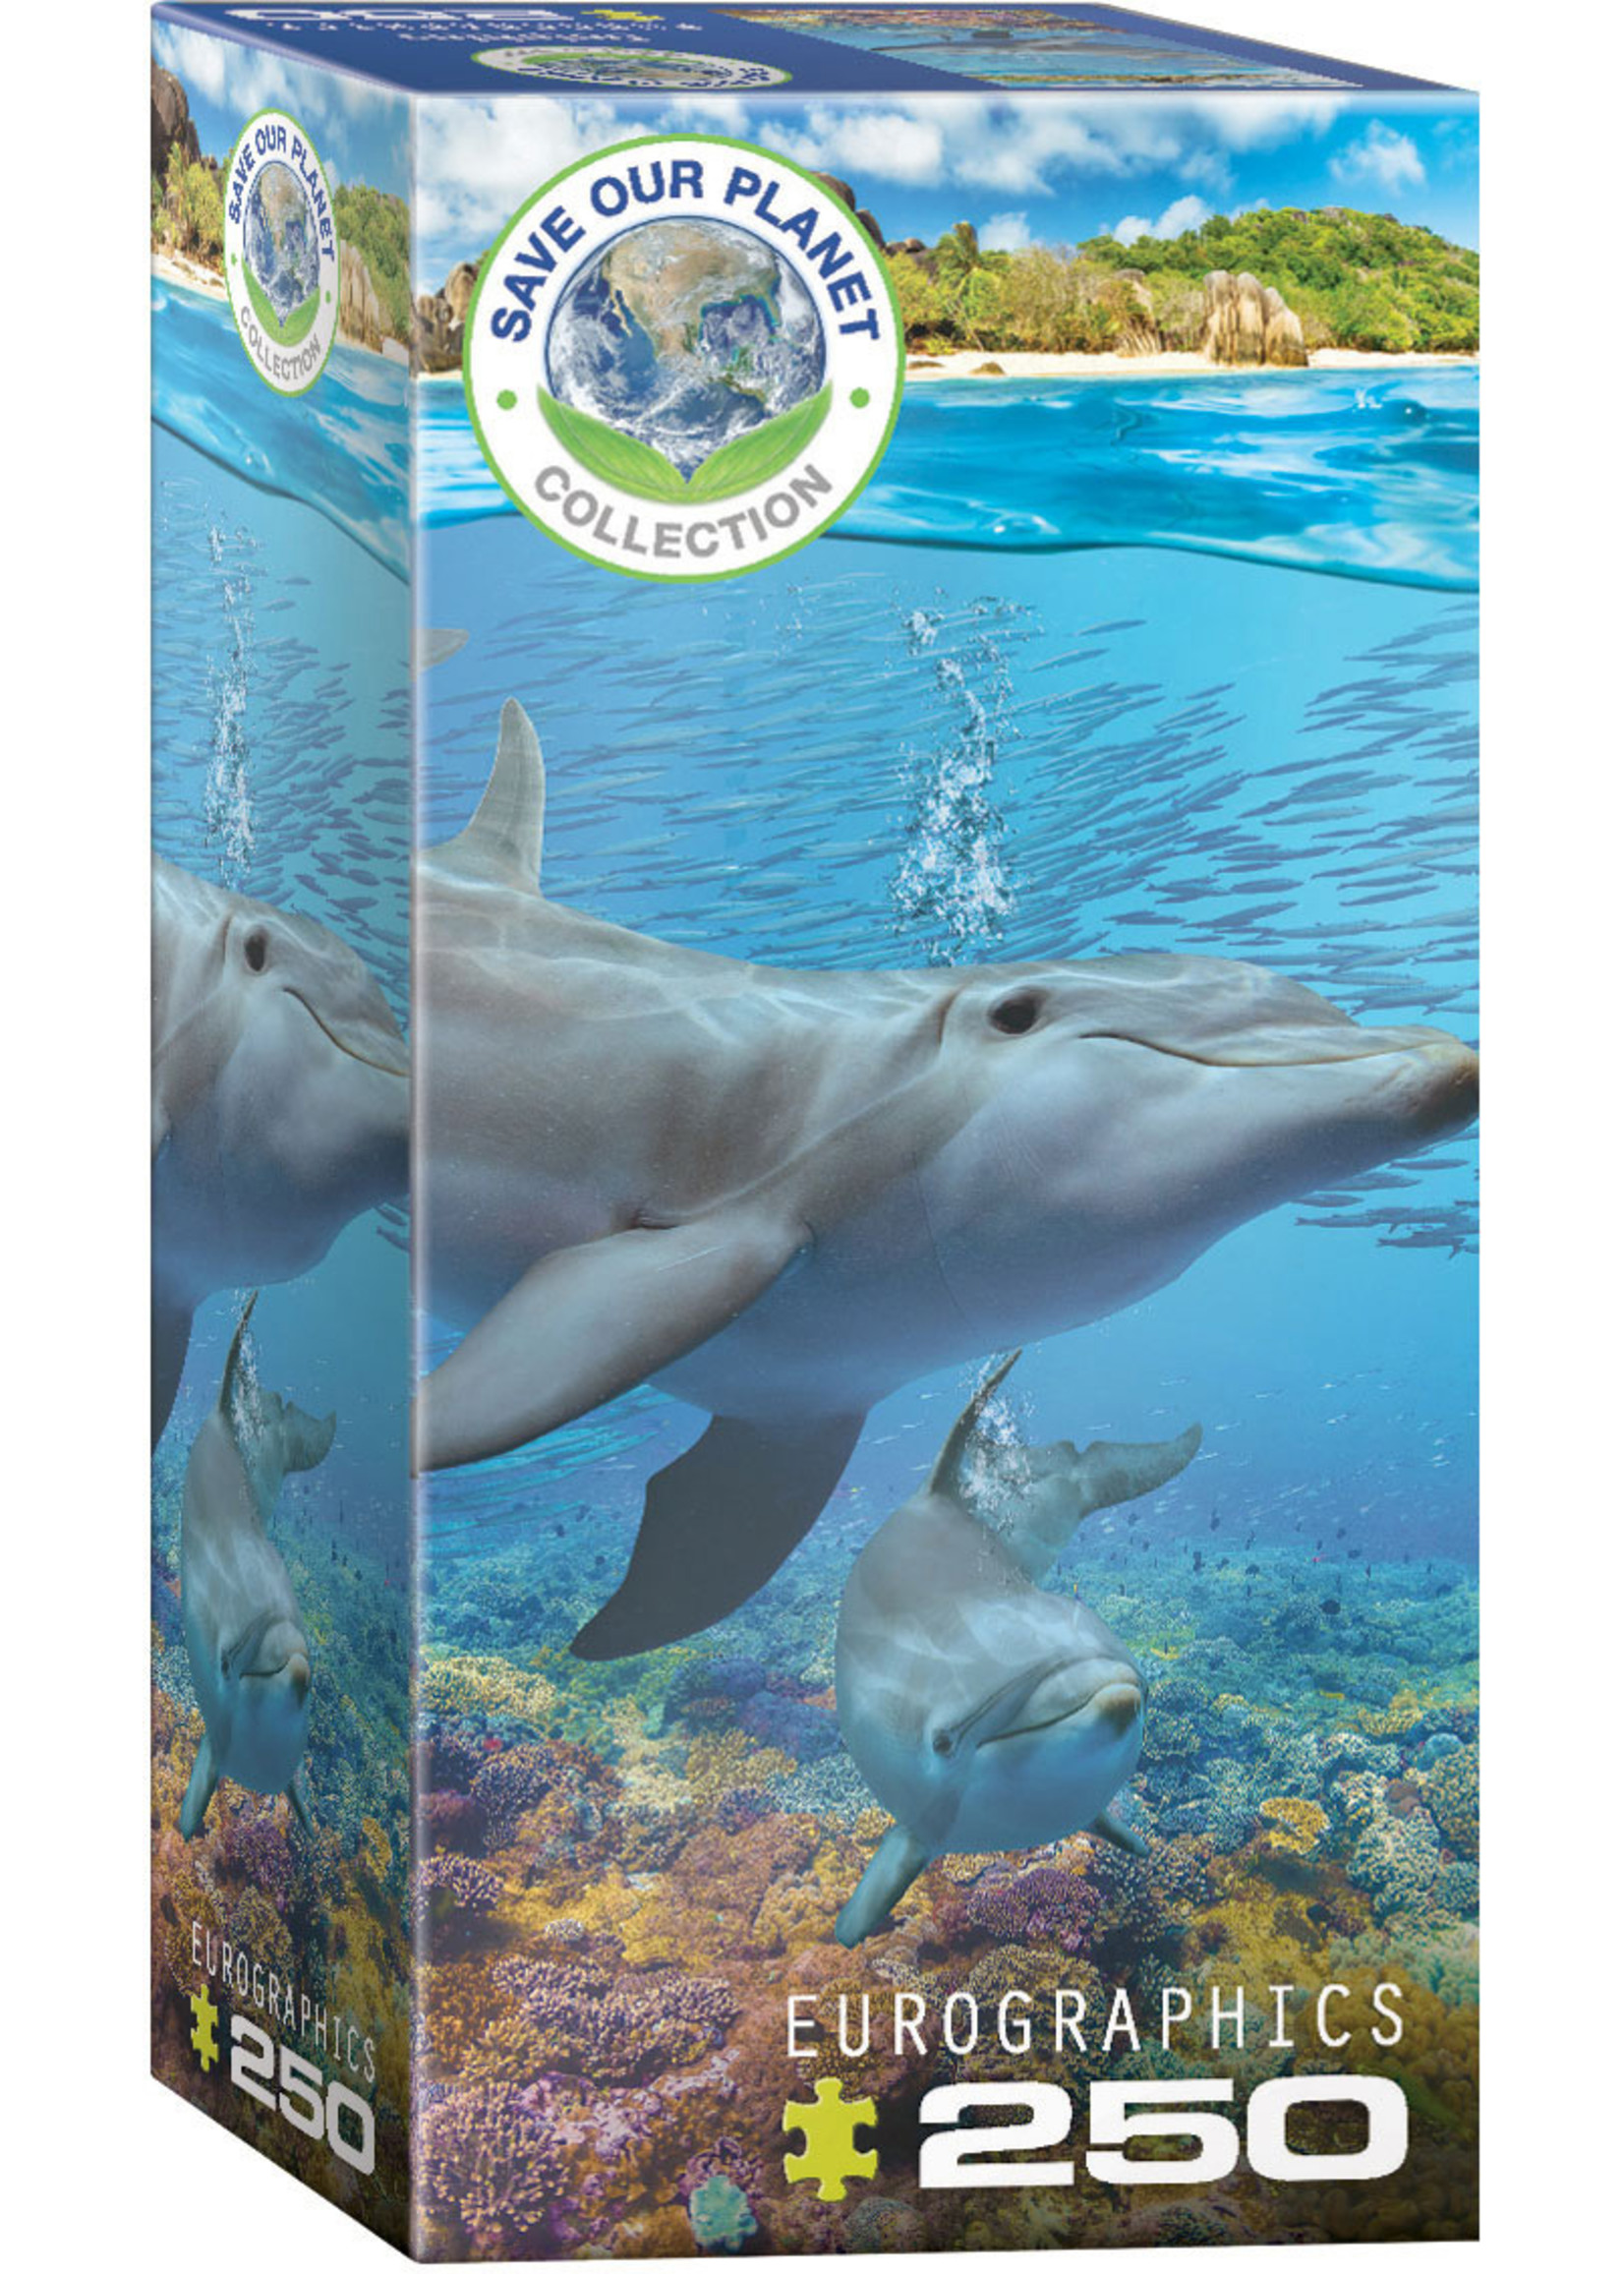 Eurographics "Dolphins" 250 Piece Puzzle